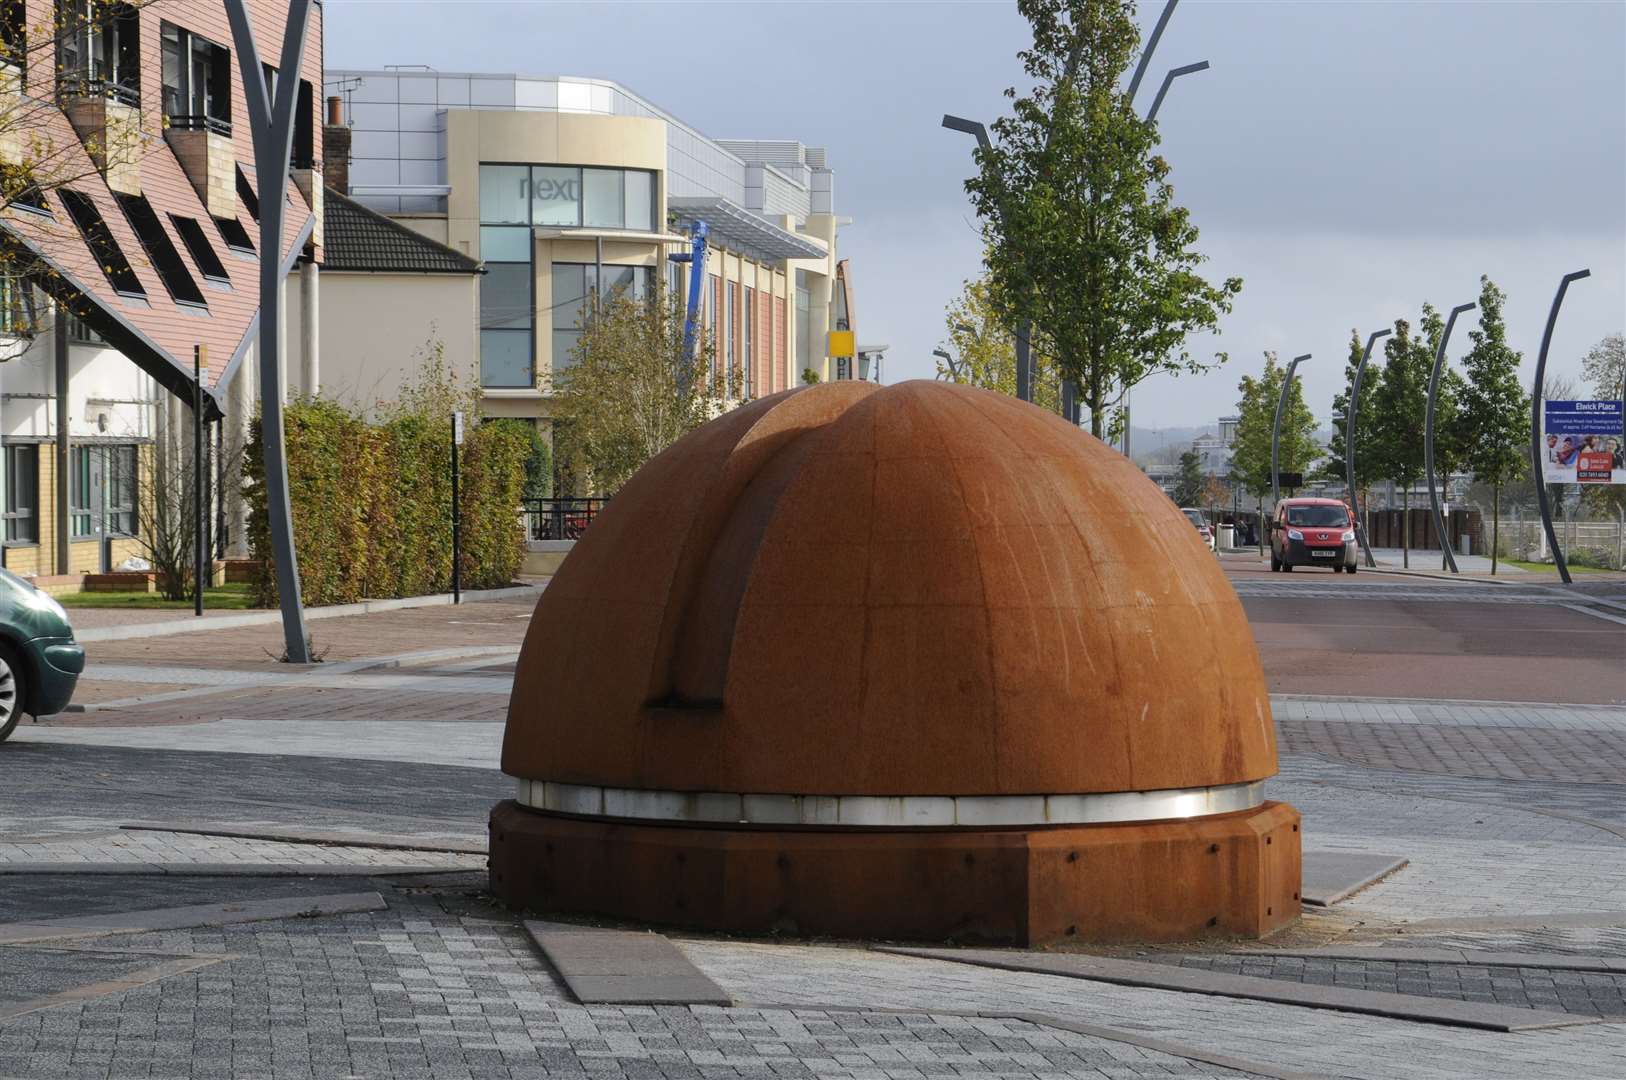 The 'Bolt Roundabout' has drawn criticism over its design